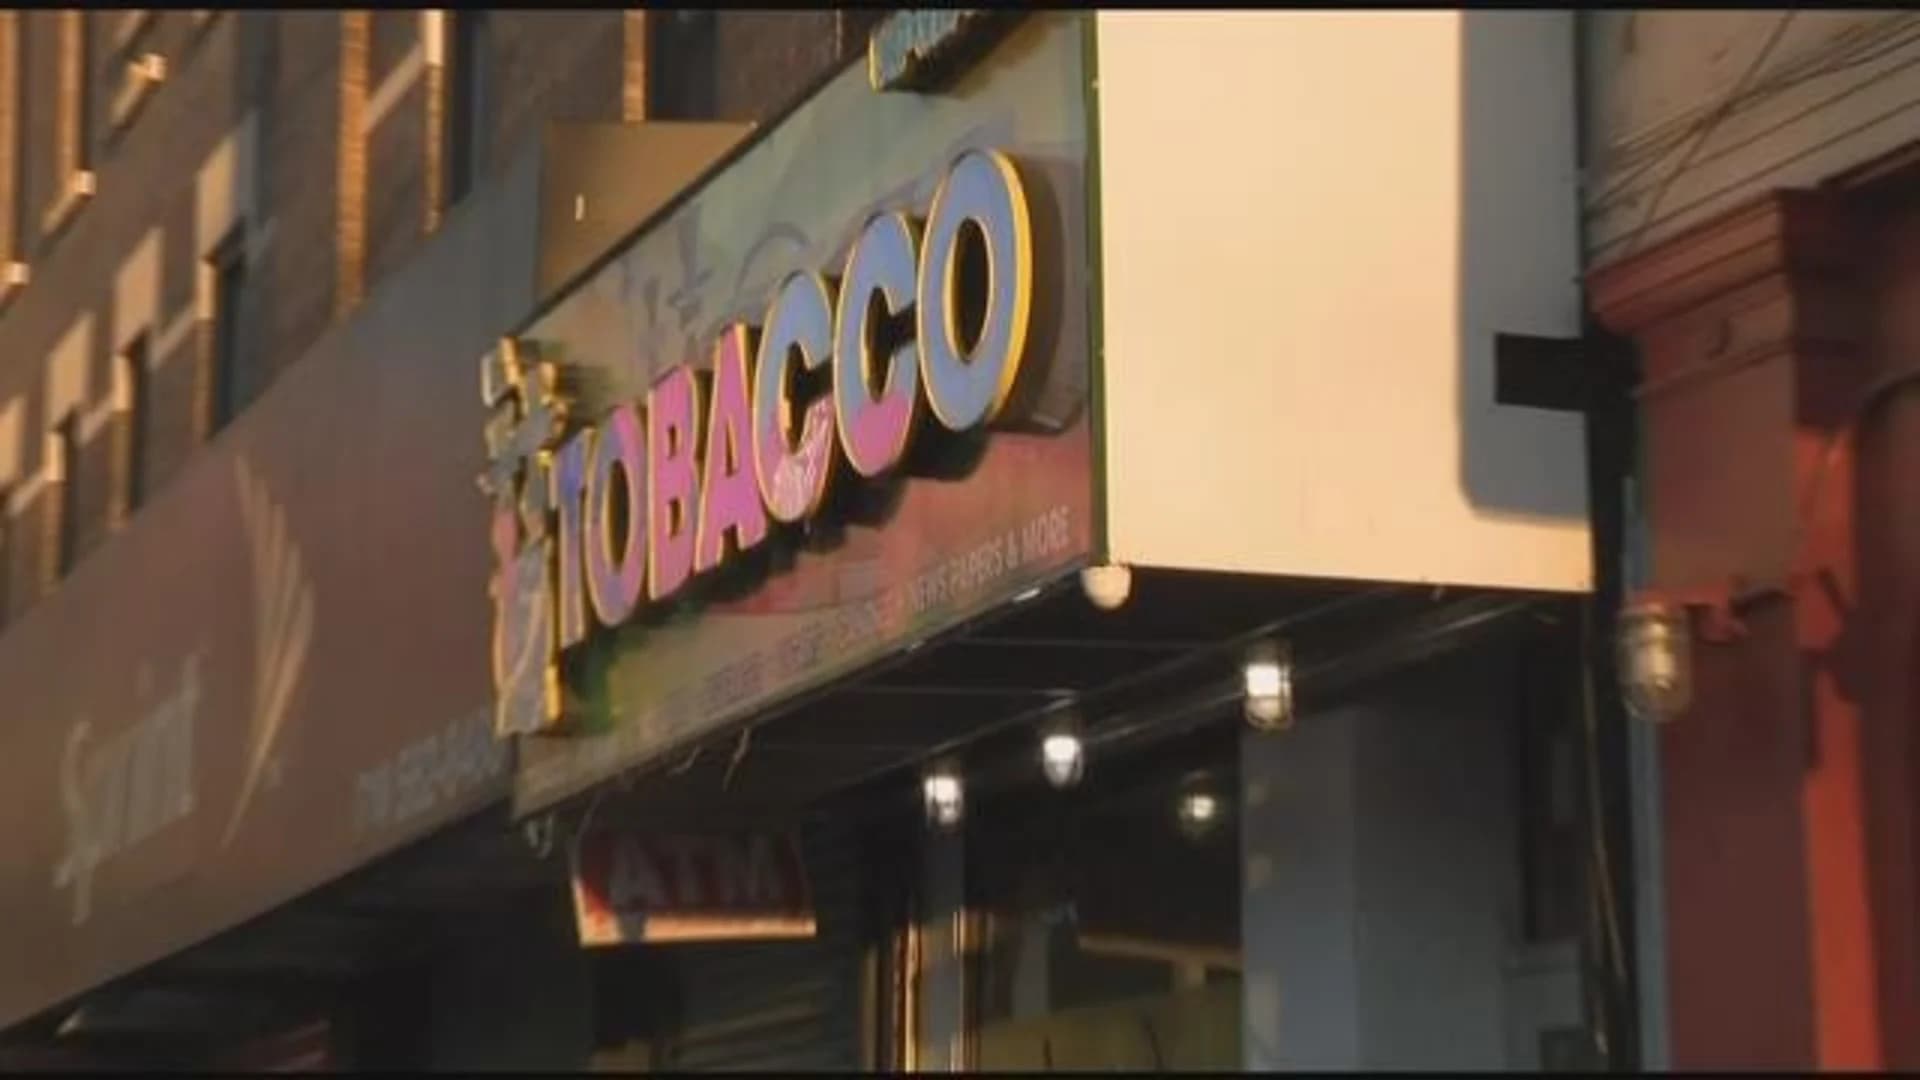 Police: Mount Hope tobacco store employee pistol whipped during robbery